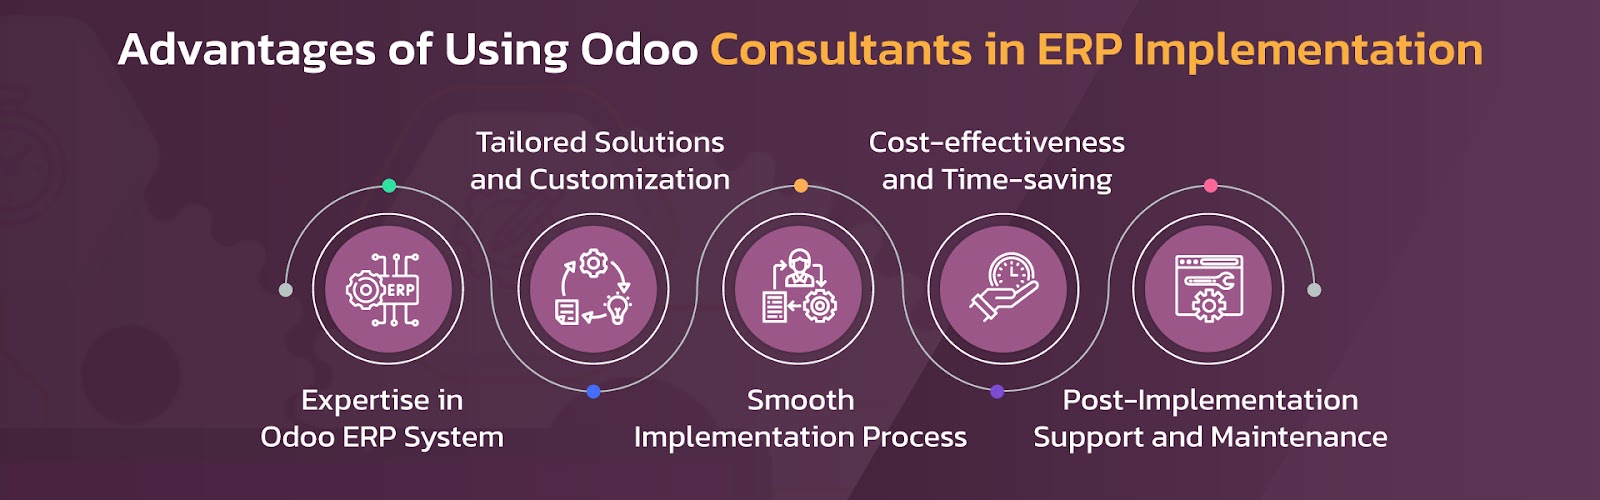 Advantages of Using Odoo Consultants in ERP Implementation